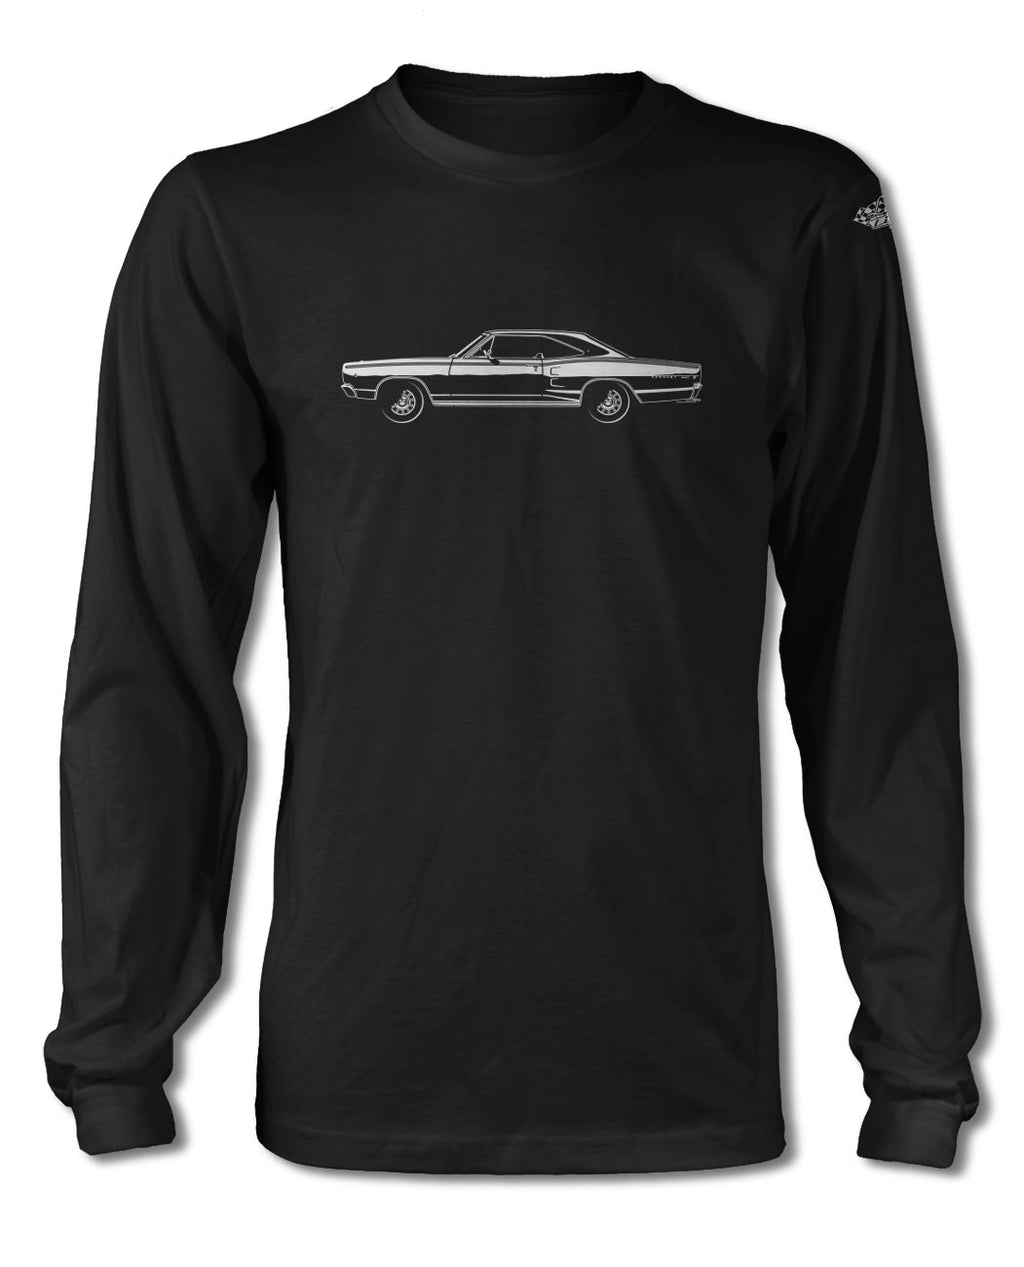 1968 Dodge Coronet 440 Coupe T-Shirt - Long Sleeves - Side View